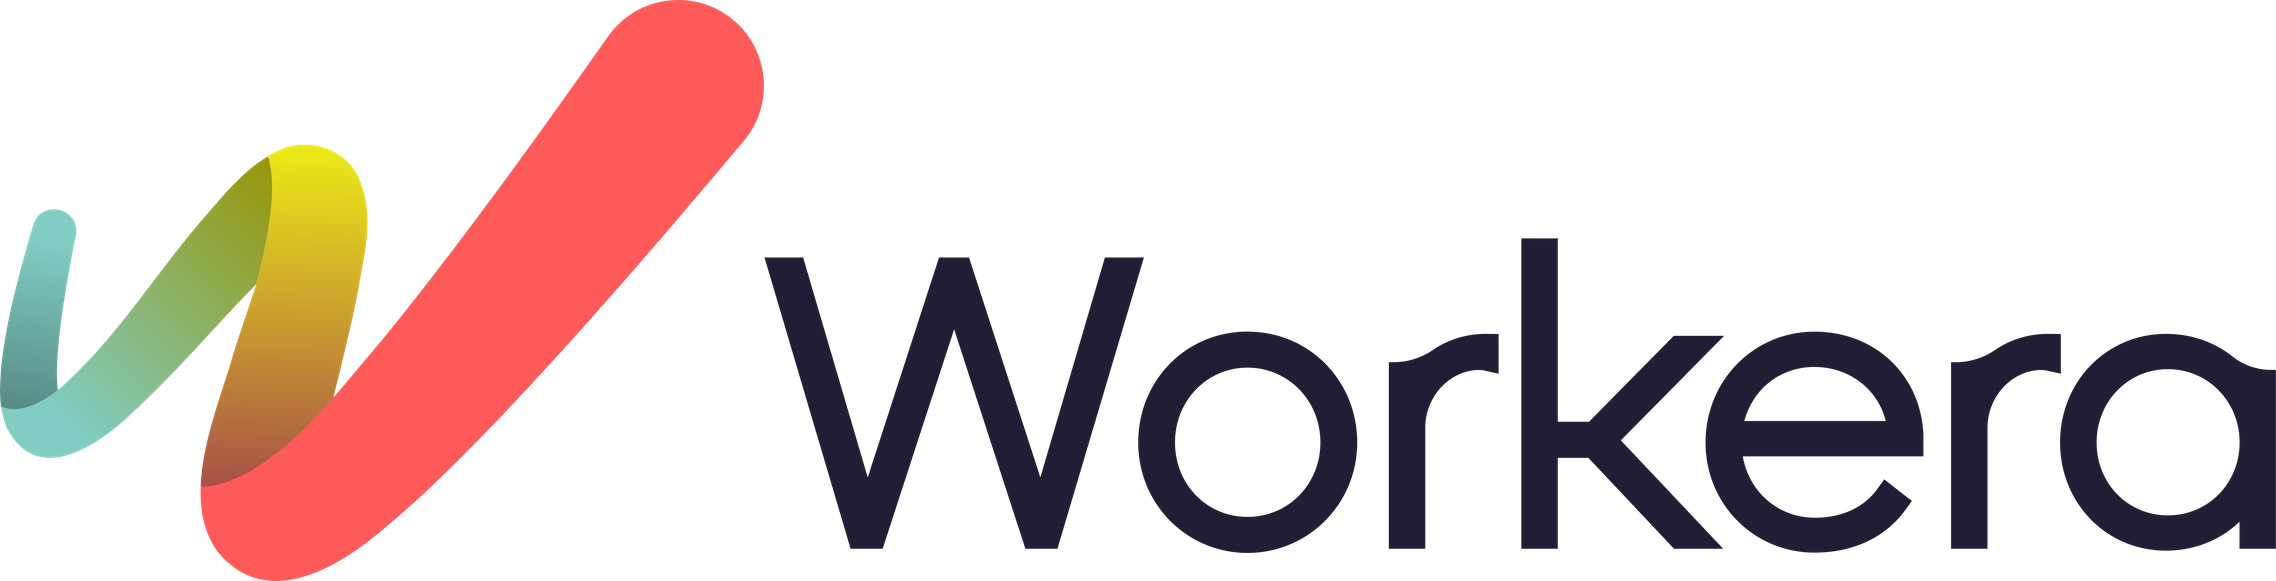 Workera Launches New, Free Skill Assessments for Individuals to Verify and Benchmark AI Skills - GlobeNewswire